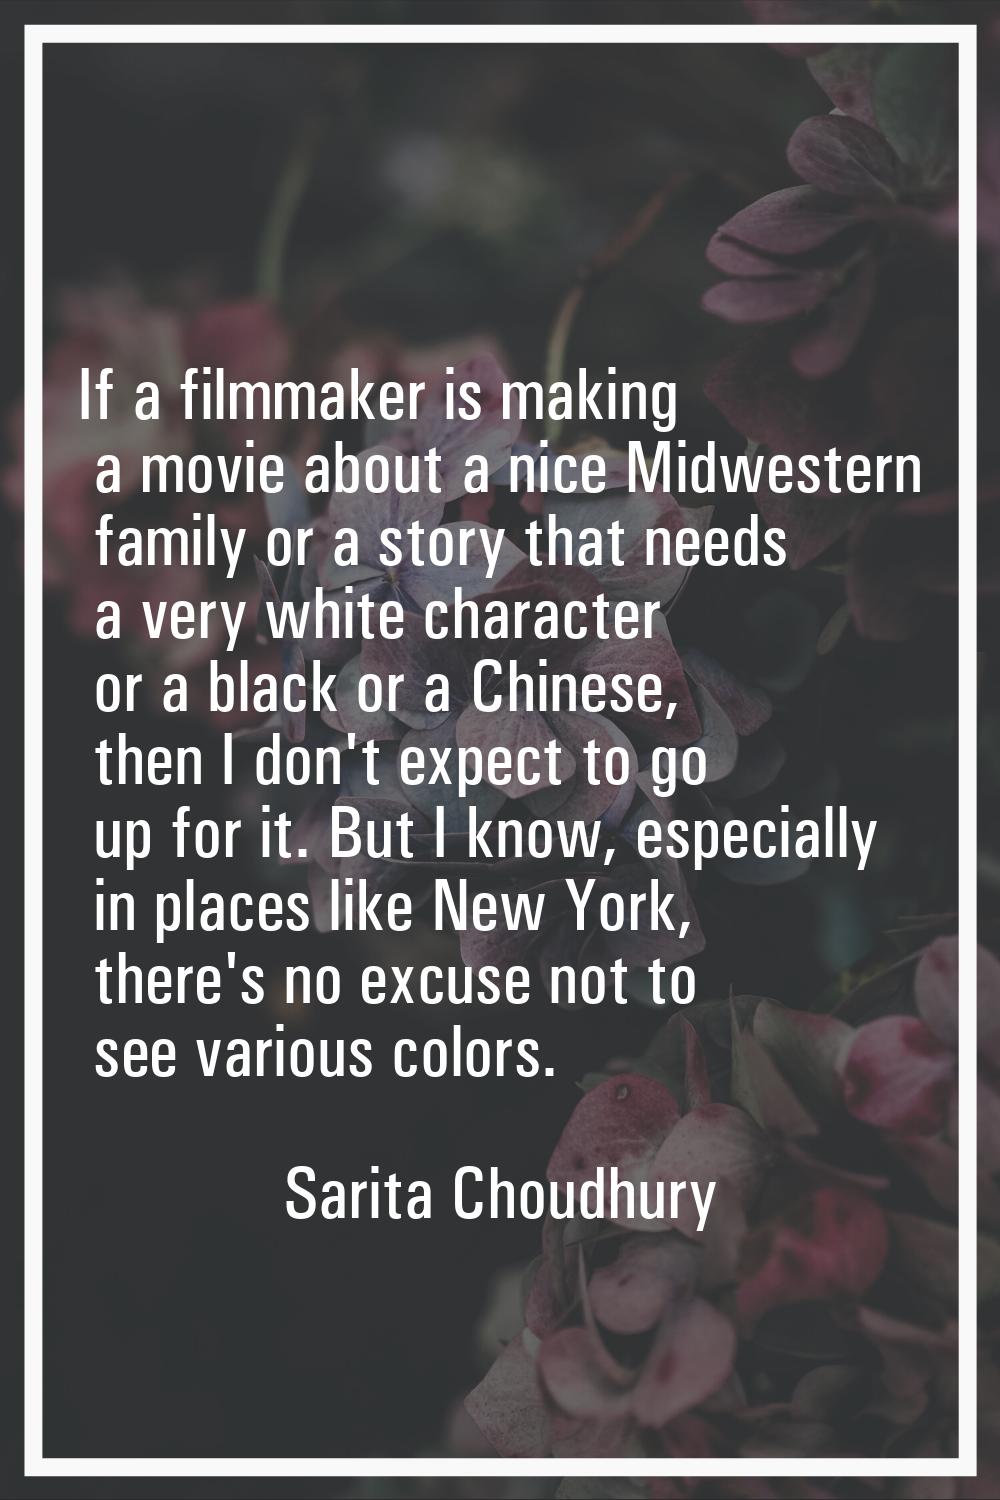 If a filmmaker is making a movie about a nice Midwestern family or a story that needs a very white 